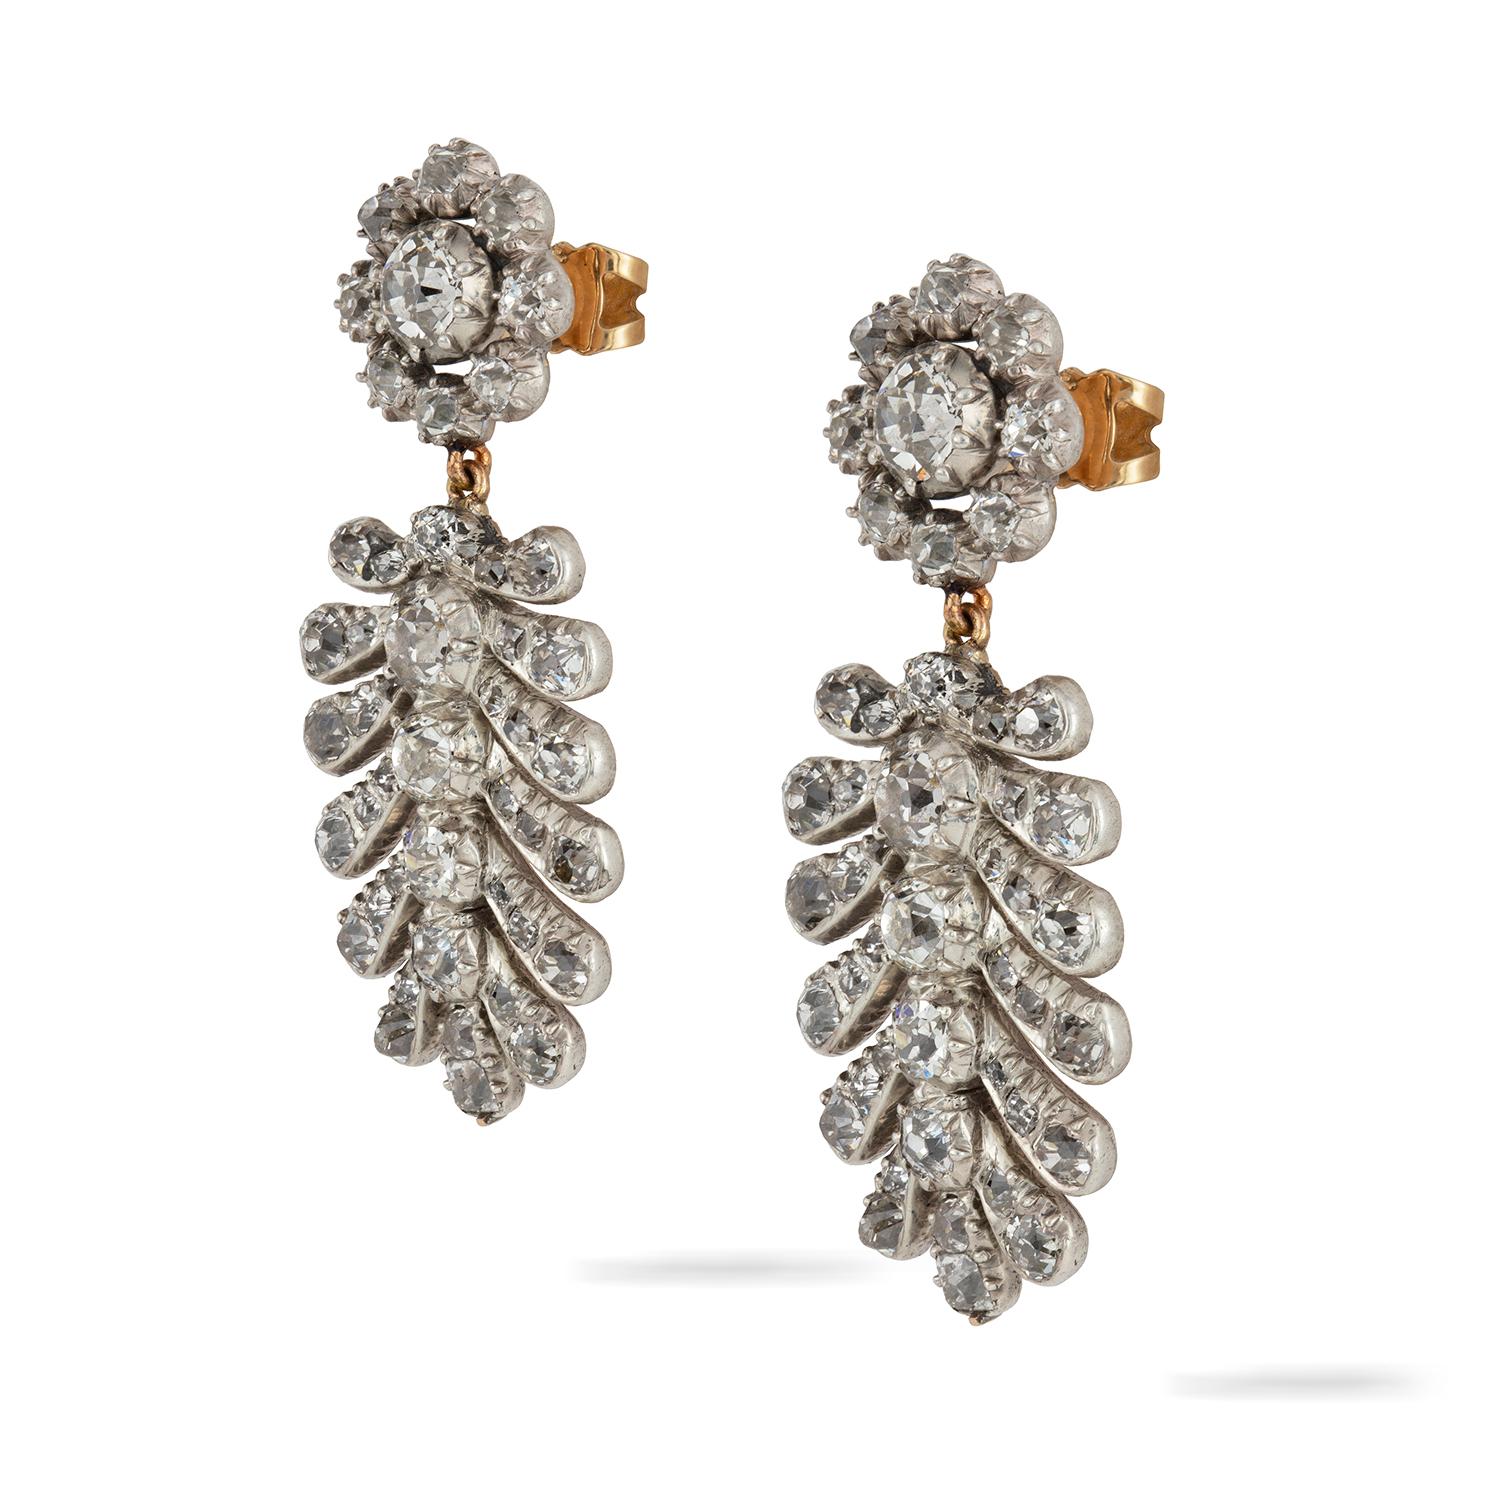 A pair of late Georgian palmette drop earrings with associated Georgian diamond cluster tops, the earrings encrusted with old-cut diamonds weighing approximately a total of 5.25 carats, all set in silver to yellow gold close back mount, with later